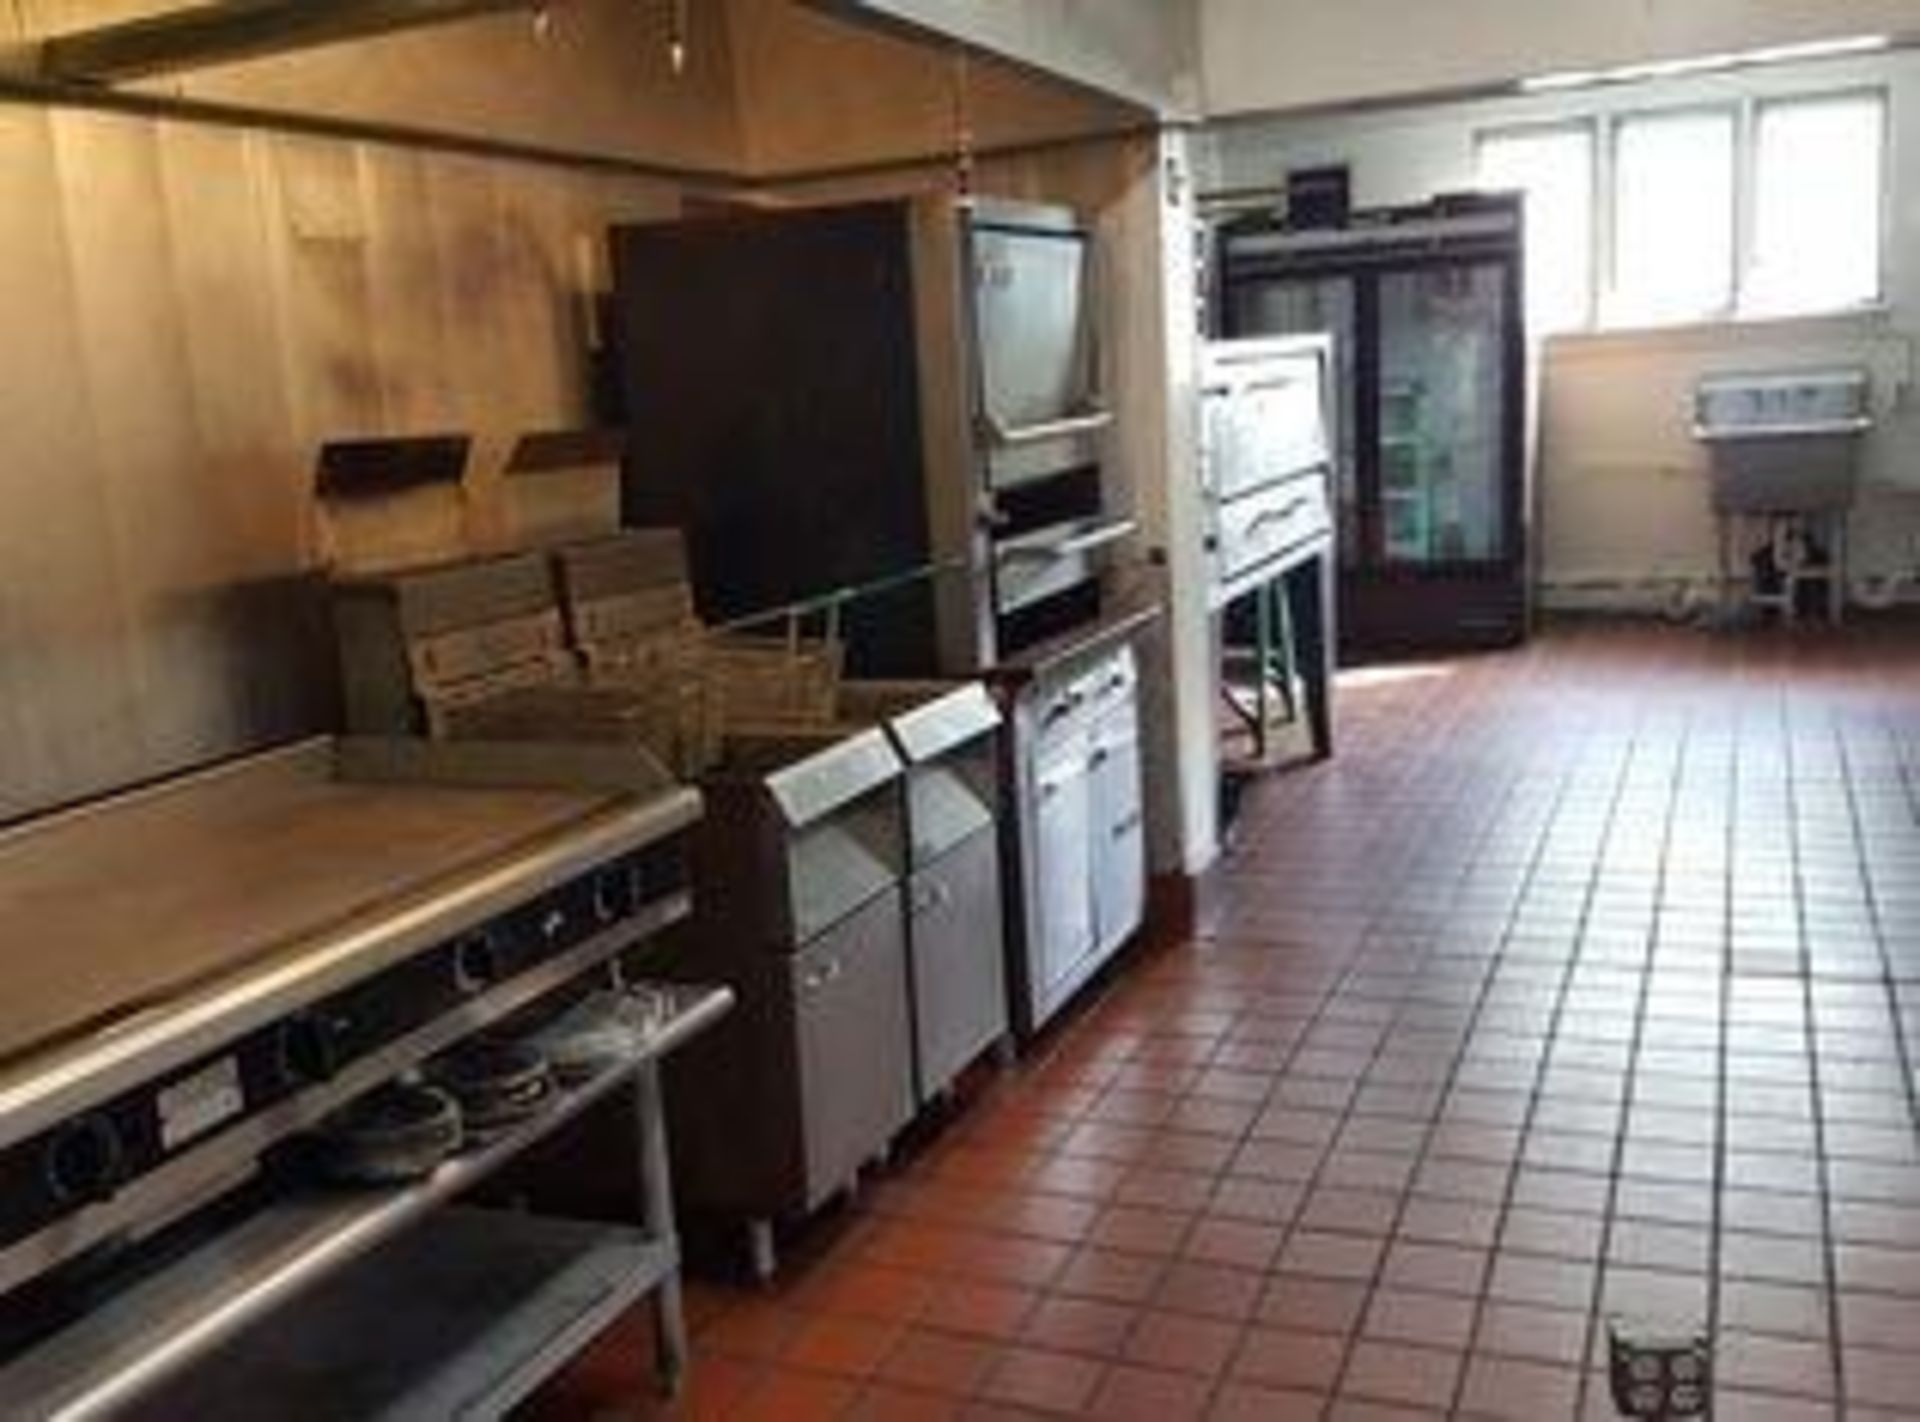 BULK BID: The Real Estate & Restaurant Equipment/Fixtures as a Whole. Lots 1 & 2. - Image 22 of 32